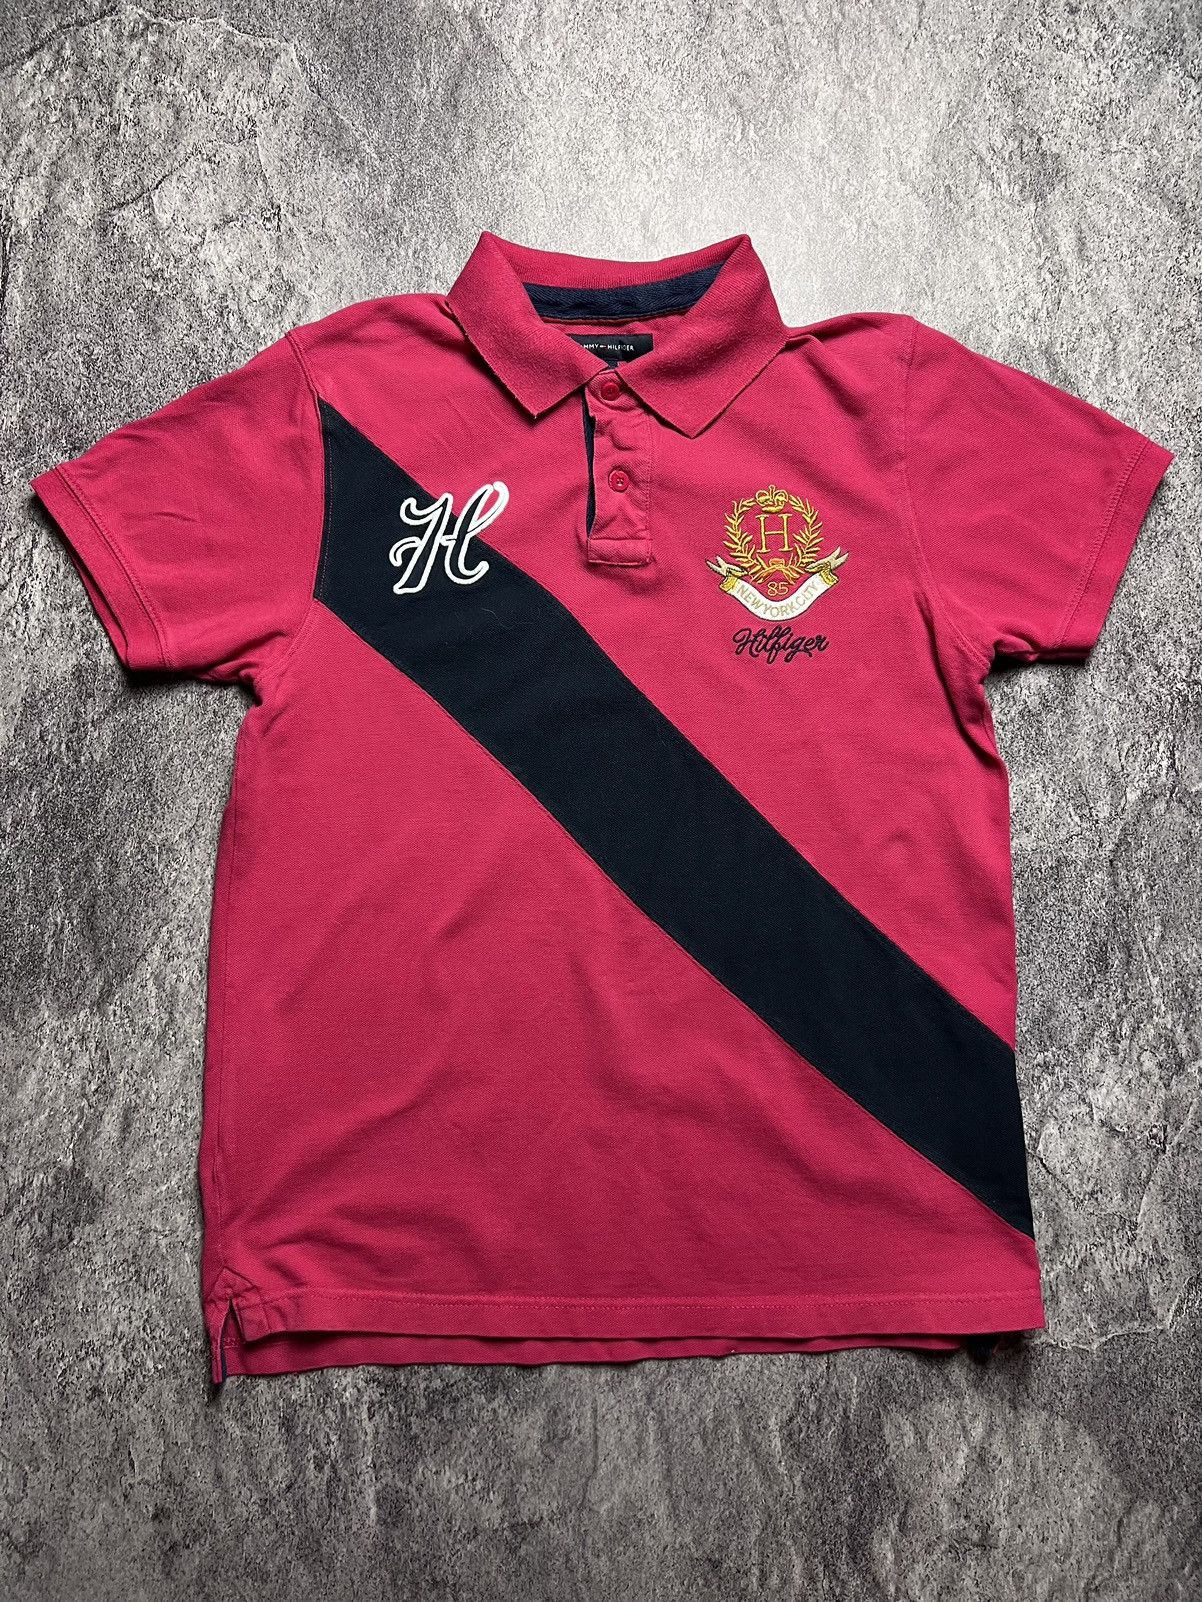 Pre-owned Tommy Hilfiger X Vintage 12k Tommy Hilfiger New York Blokecore Japan Style Polo Tee In Pink